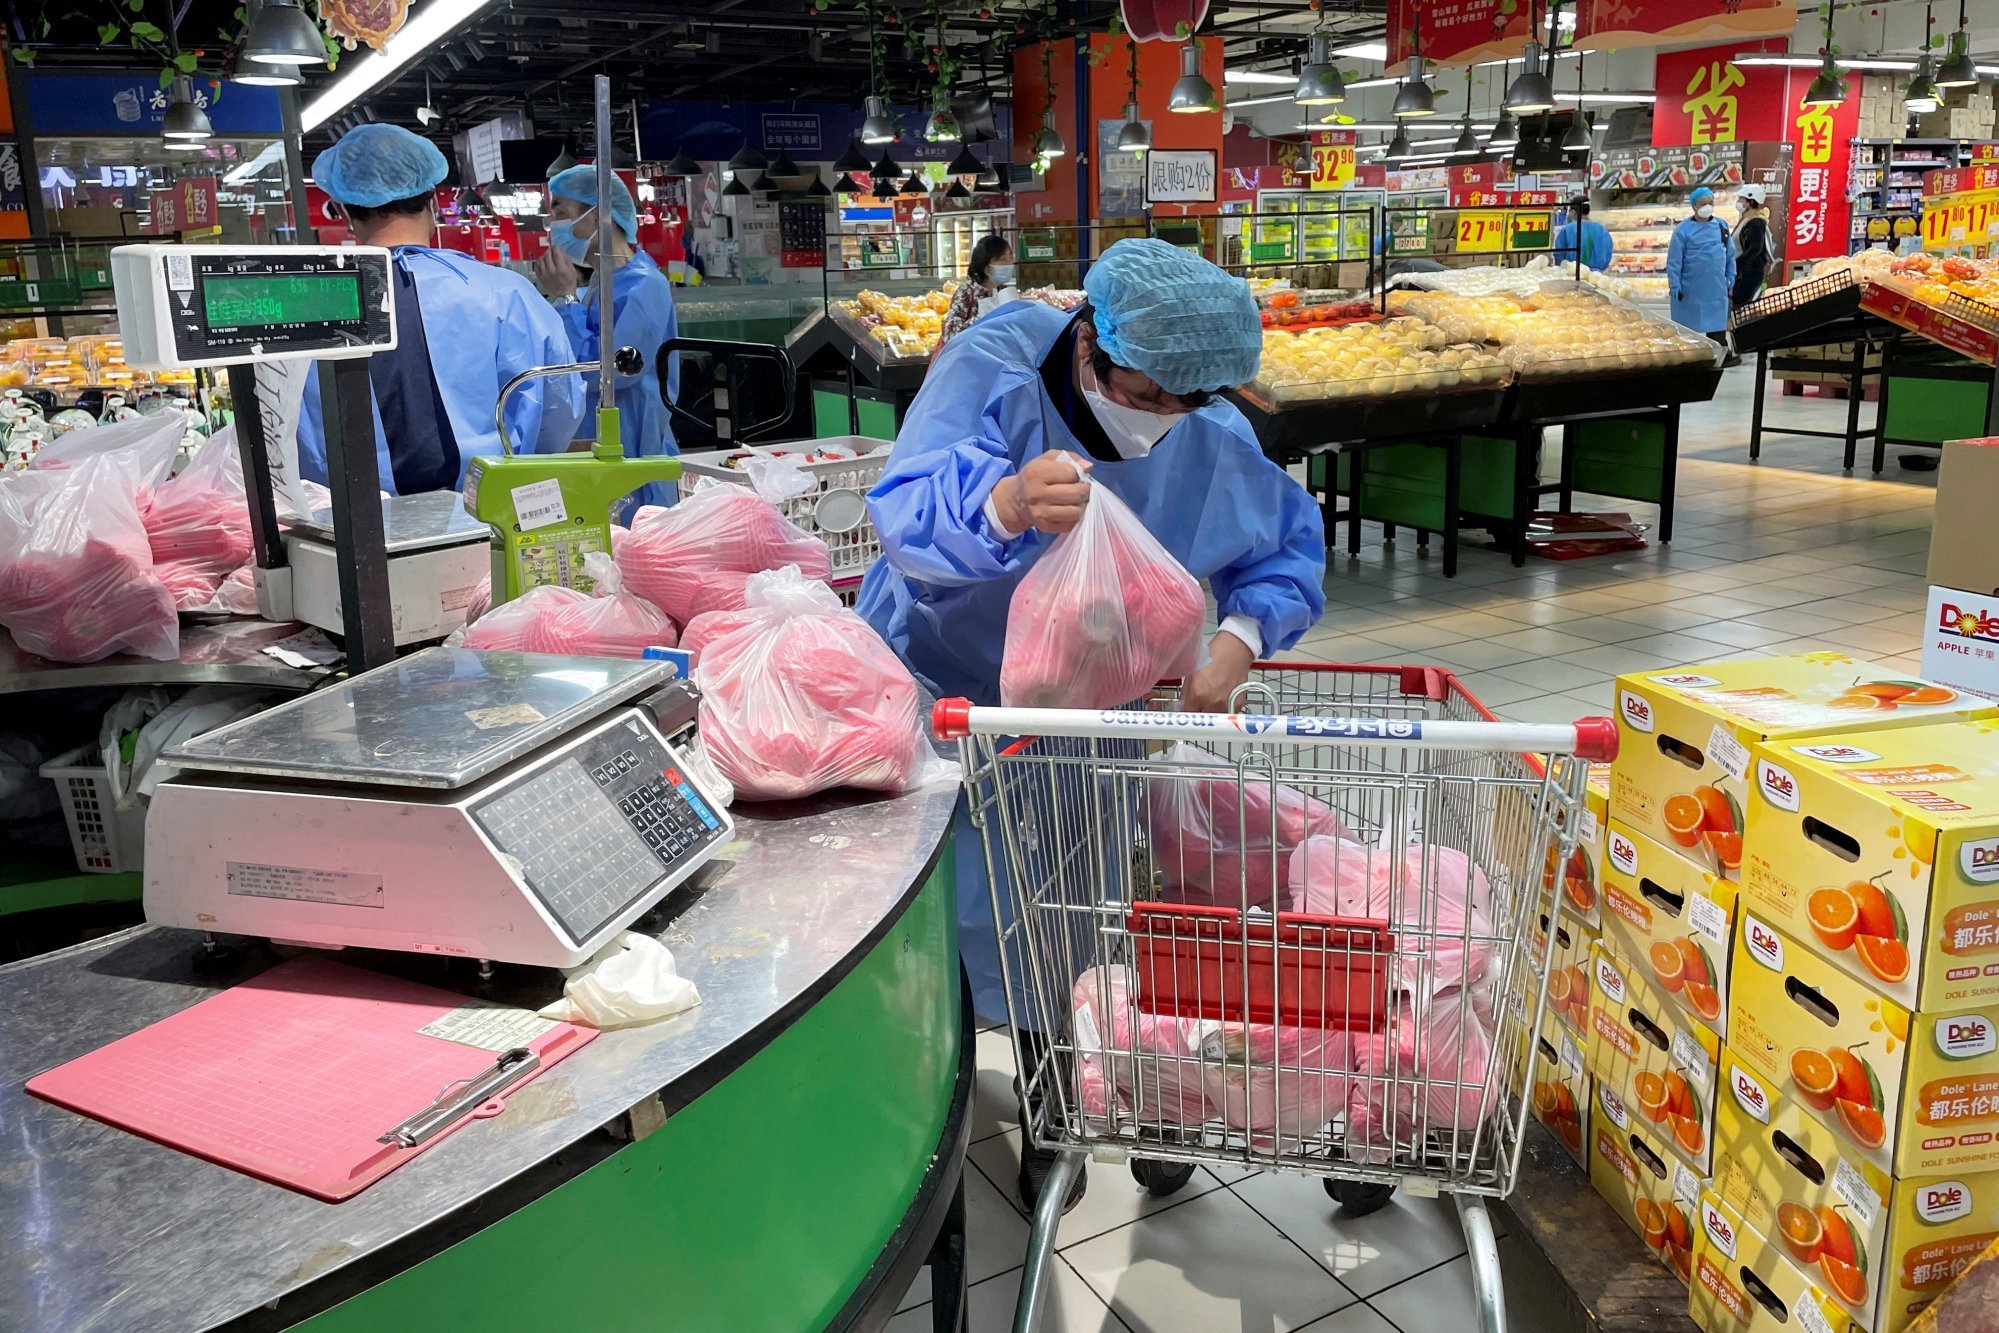 A worker in a protective suit sorts vegetables in a shopping trolley, at a reopened Carrefour supermarket amid the coronavirus disease (COVID-19) outbreak in Shanghai on May 19, 2022. Photo: Reuters